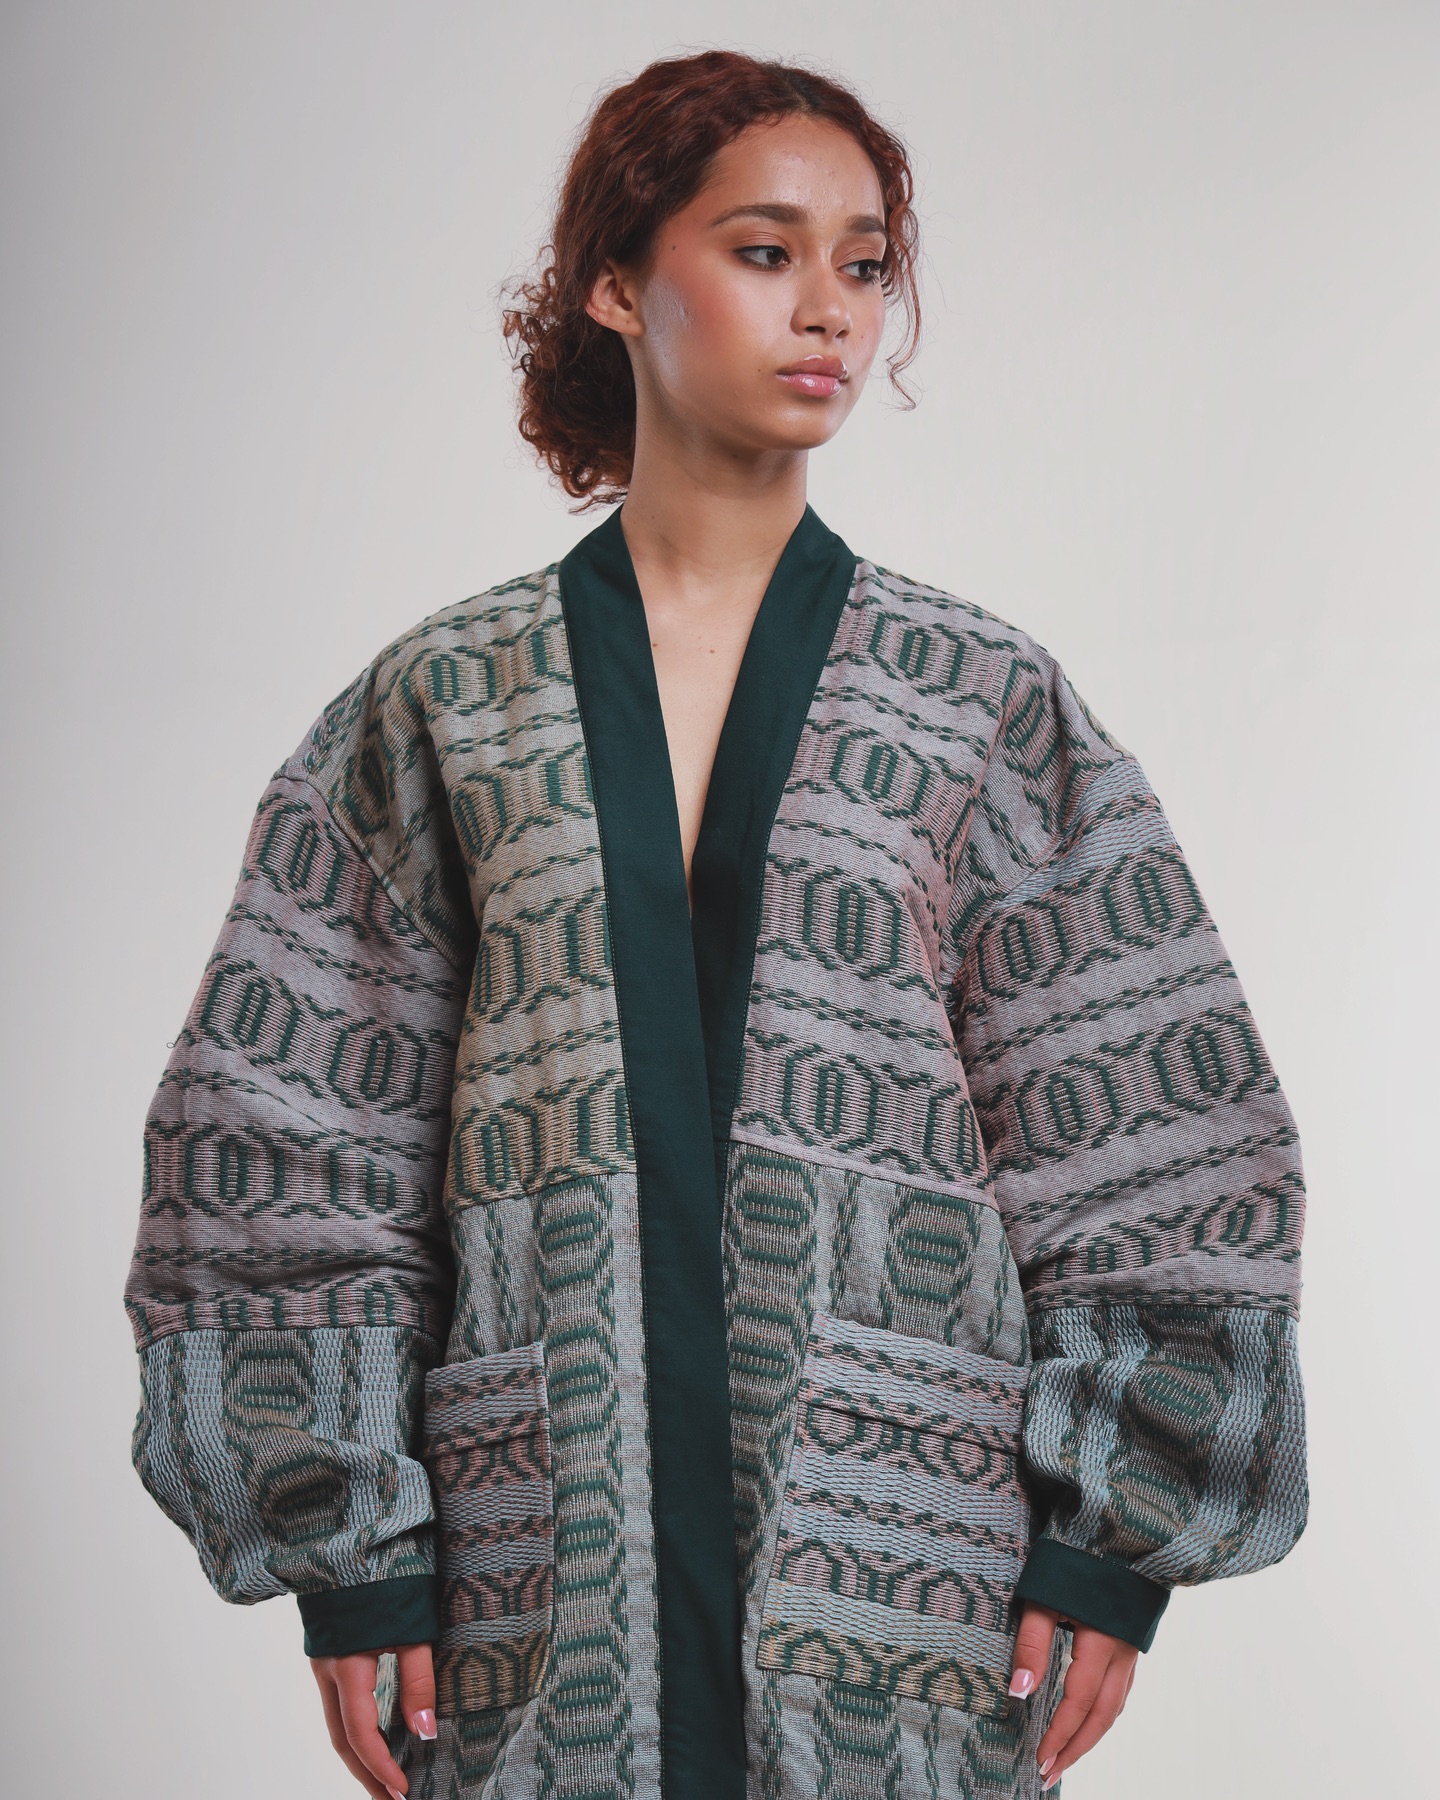 At MAFI MAFI, we prioritize artisanal craftsmanship and sustainable practices. This exquisite green kimono jacket, with its full pattern beautifully handwoven, blends cultural motifs and modernity. Each piece is a testament to our commitment to preserving traditional techniques while embracing contemporary design. #MAFIMAFI #ArtisanalExcellence #SustainableFashion #CulturalCouture

Photo @amanasrat 
Muse @_matildemaletta_